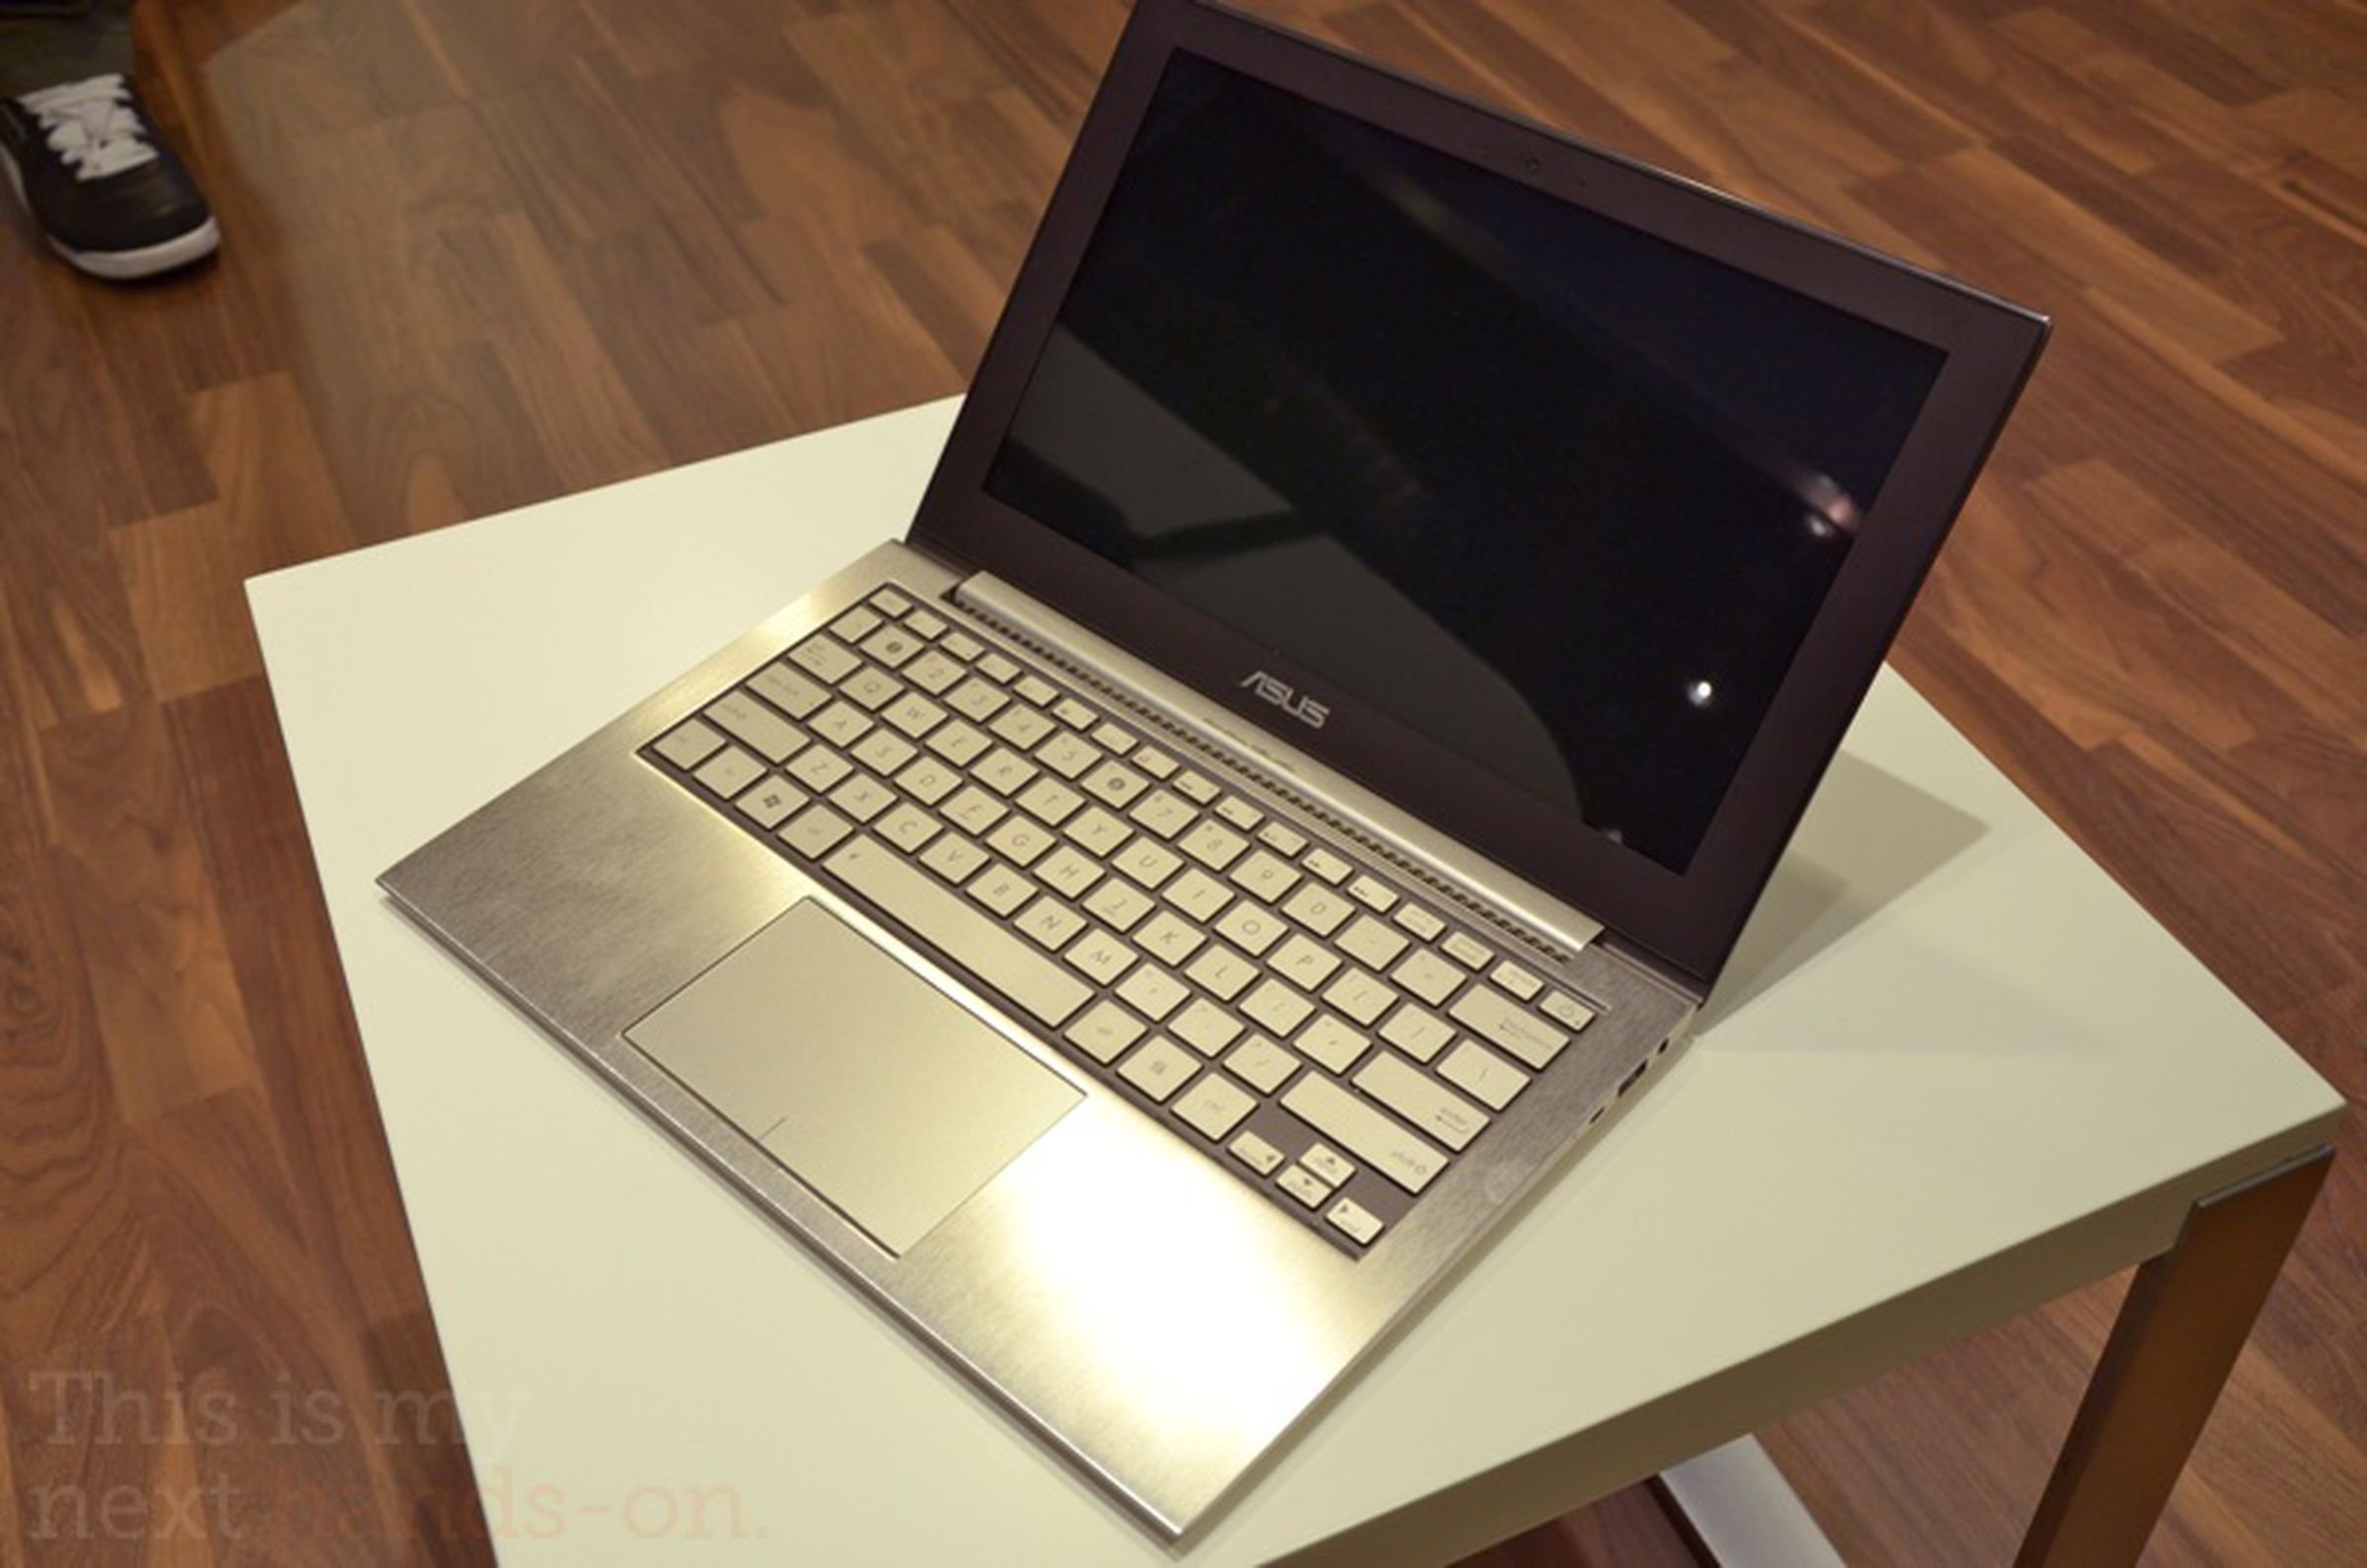 ASUS UX21 ultrabook hands-on, plus 13.3-inch UX31 confirmation 